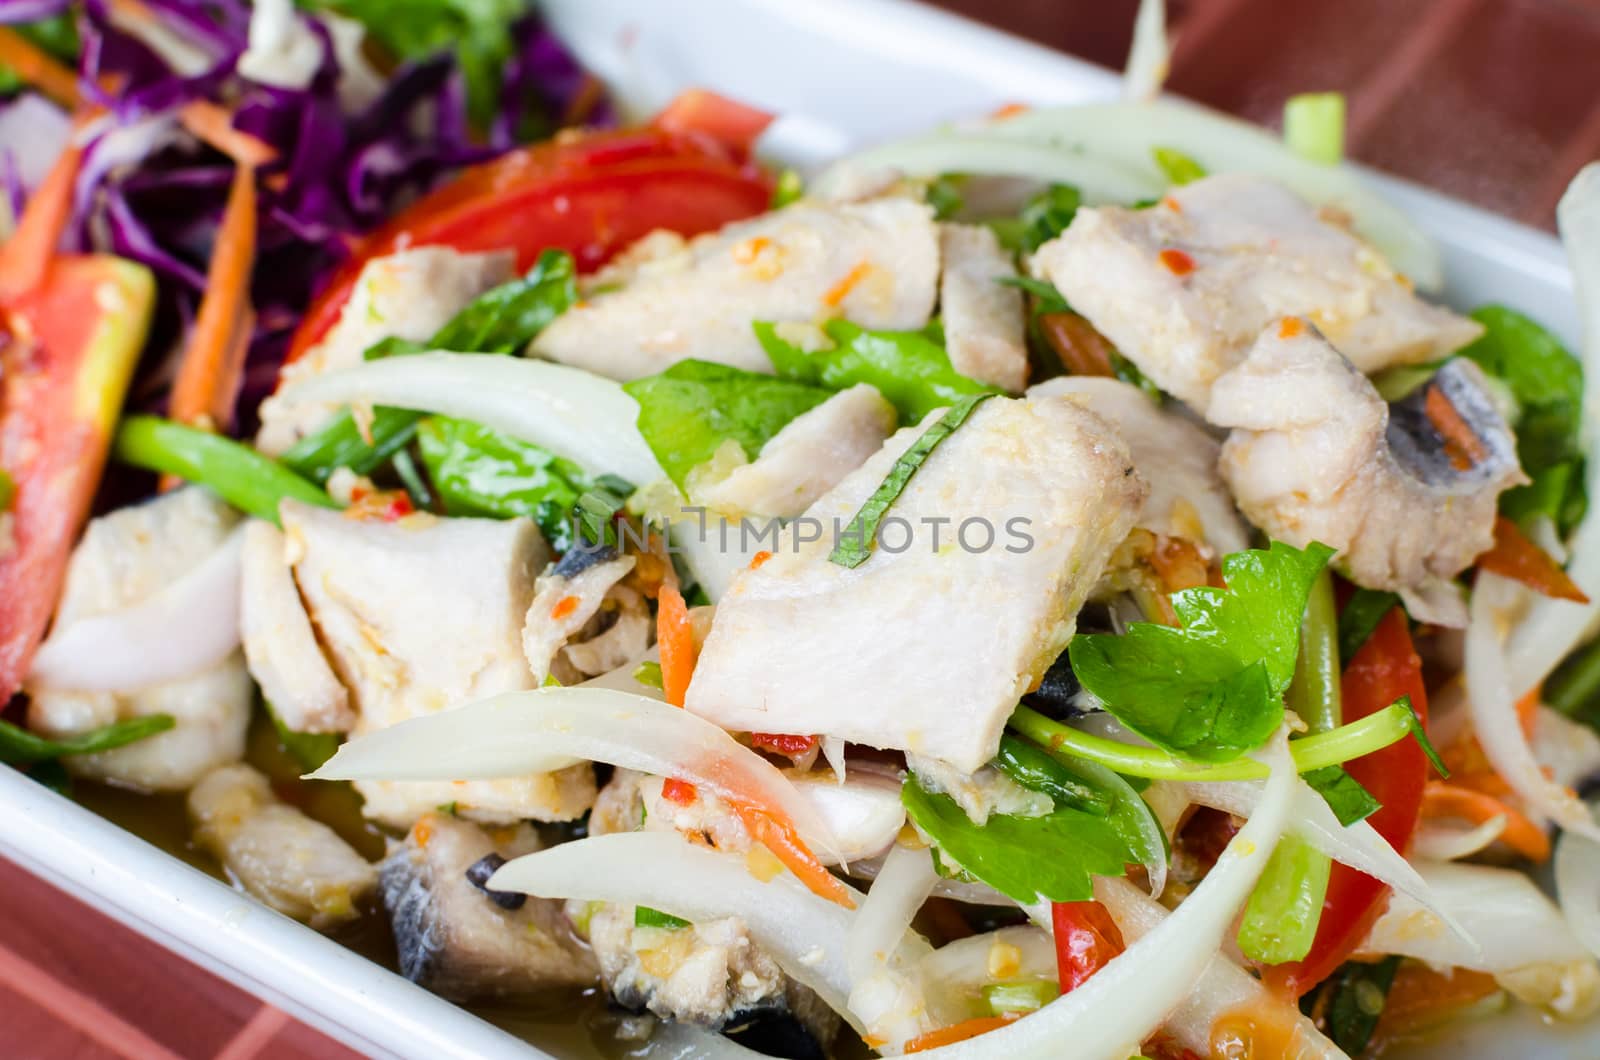 Spicy mackerel salad mix with onion, chili, coriander and lime juice.
spicy sweet sour flavor.